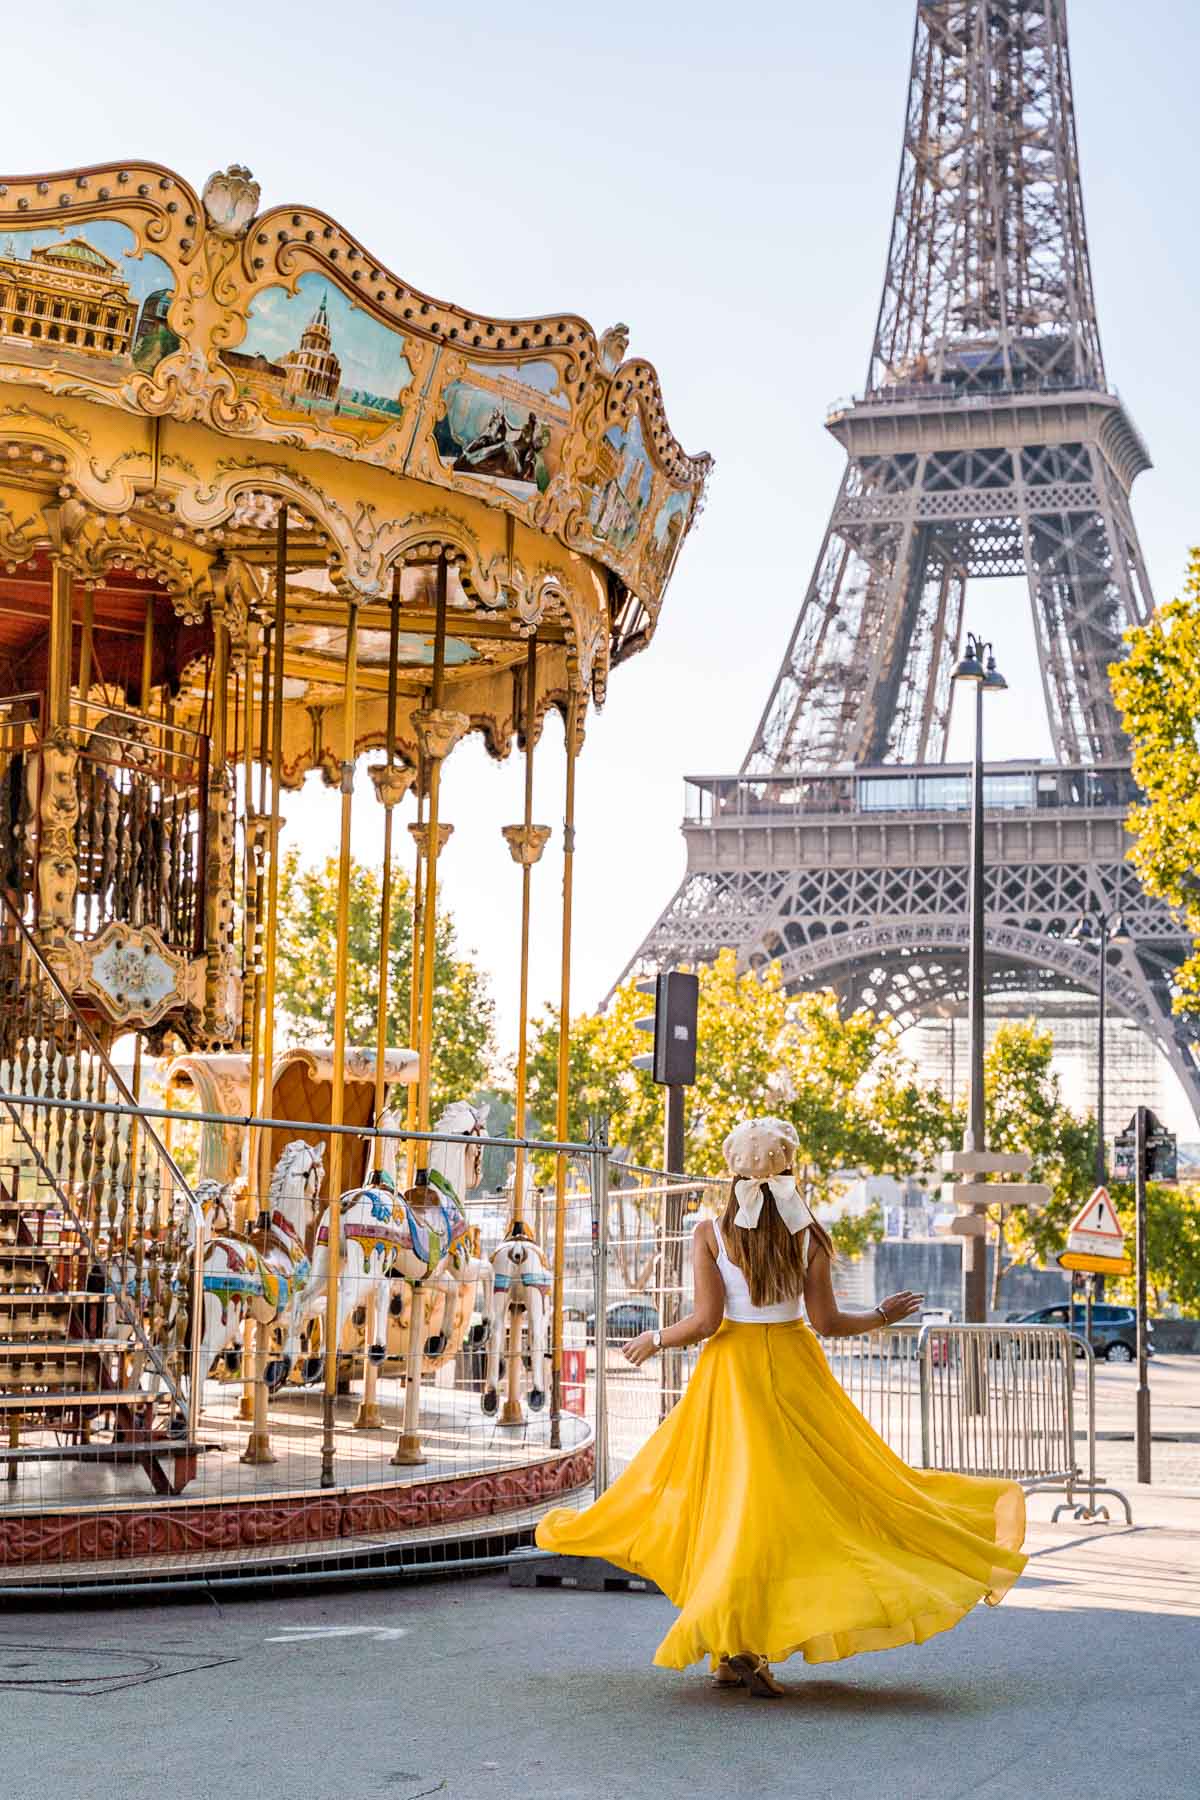 Girl in a yellow skirt twirling in front of a carousel near the Eiffel Tower in Paris